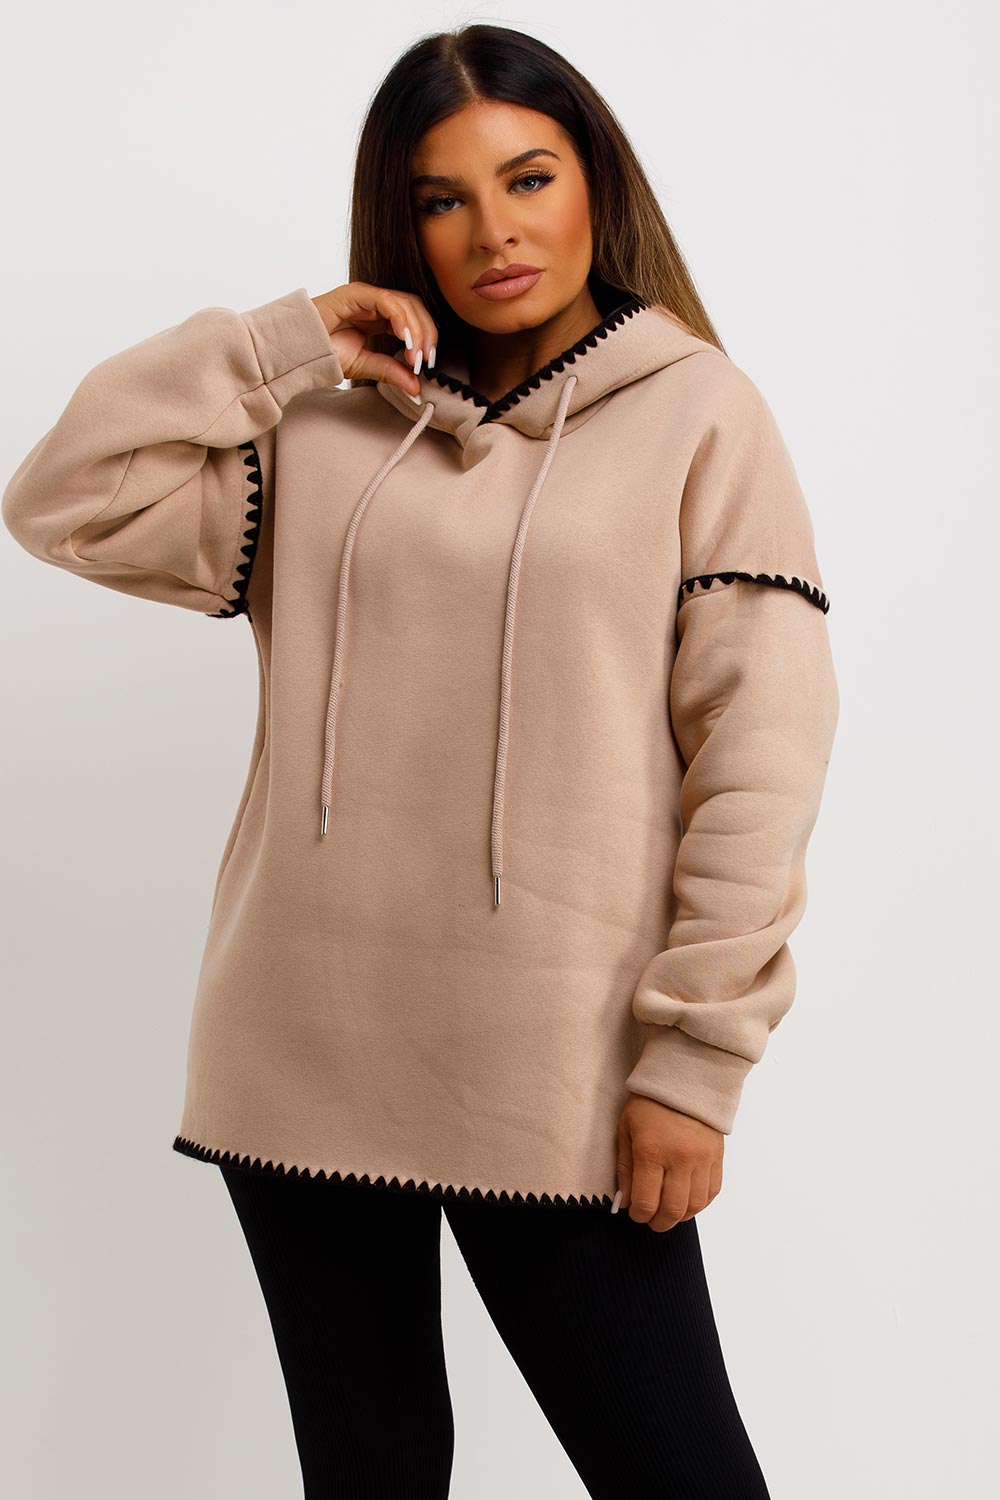 beige oversized hoodie with contrast stitches